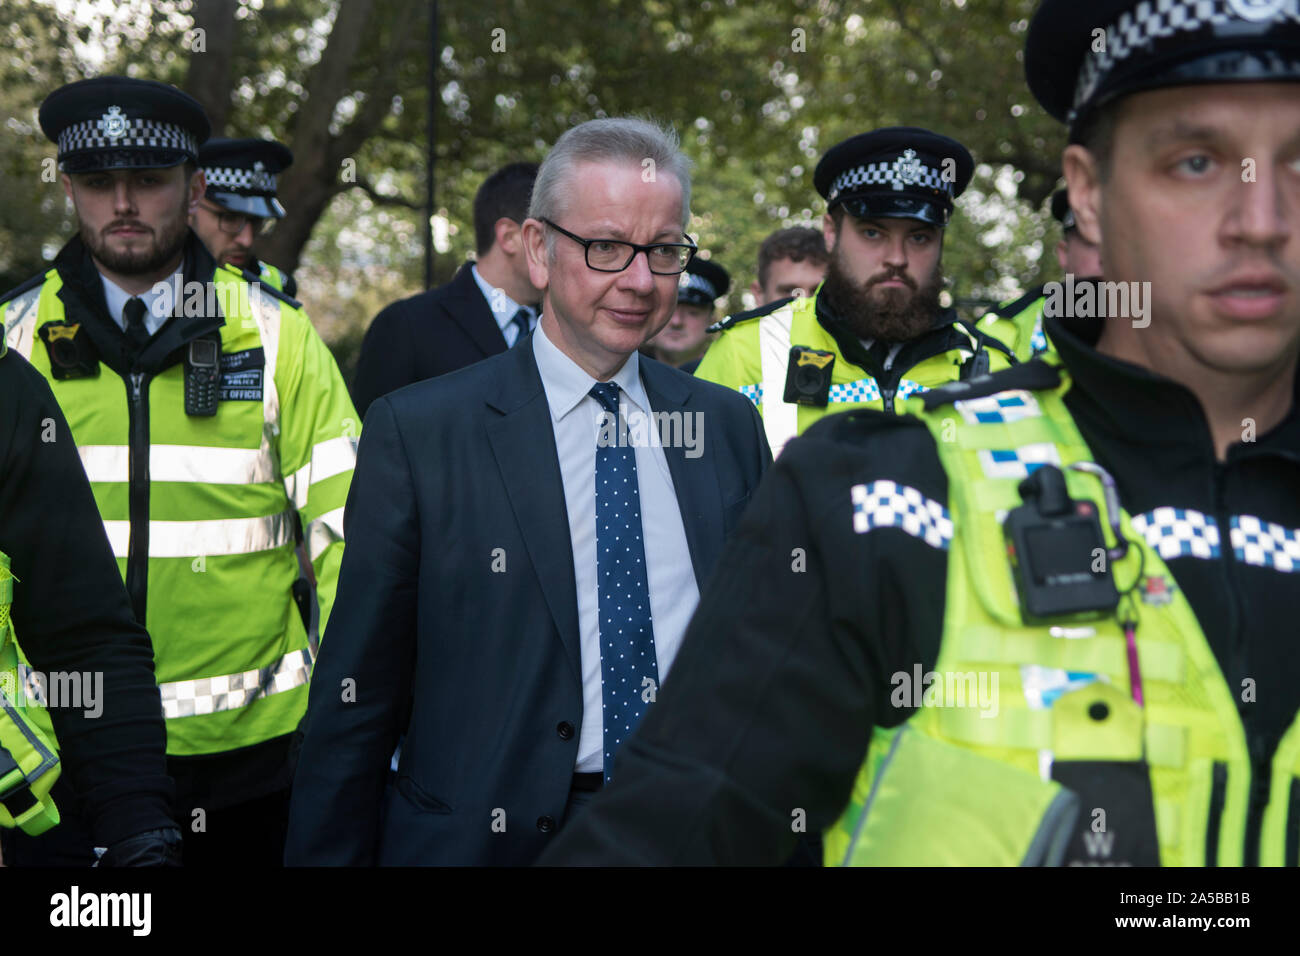 Michael Gove MP needs police protection when he leaves the House of Commons after the Brexit debate on Super Saturday  19th October 2019 Threatening verbal abusive language shouted at MPs. HOMER SYKES Stock Photo